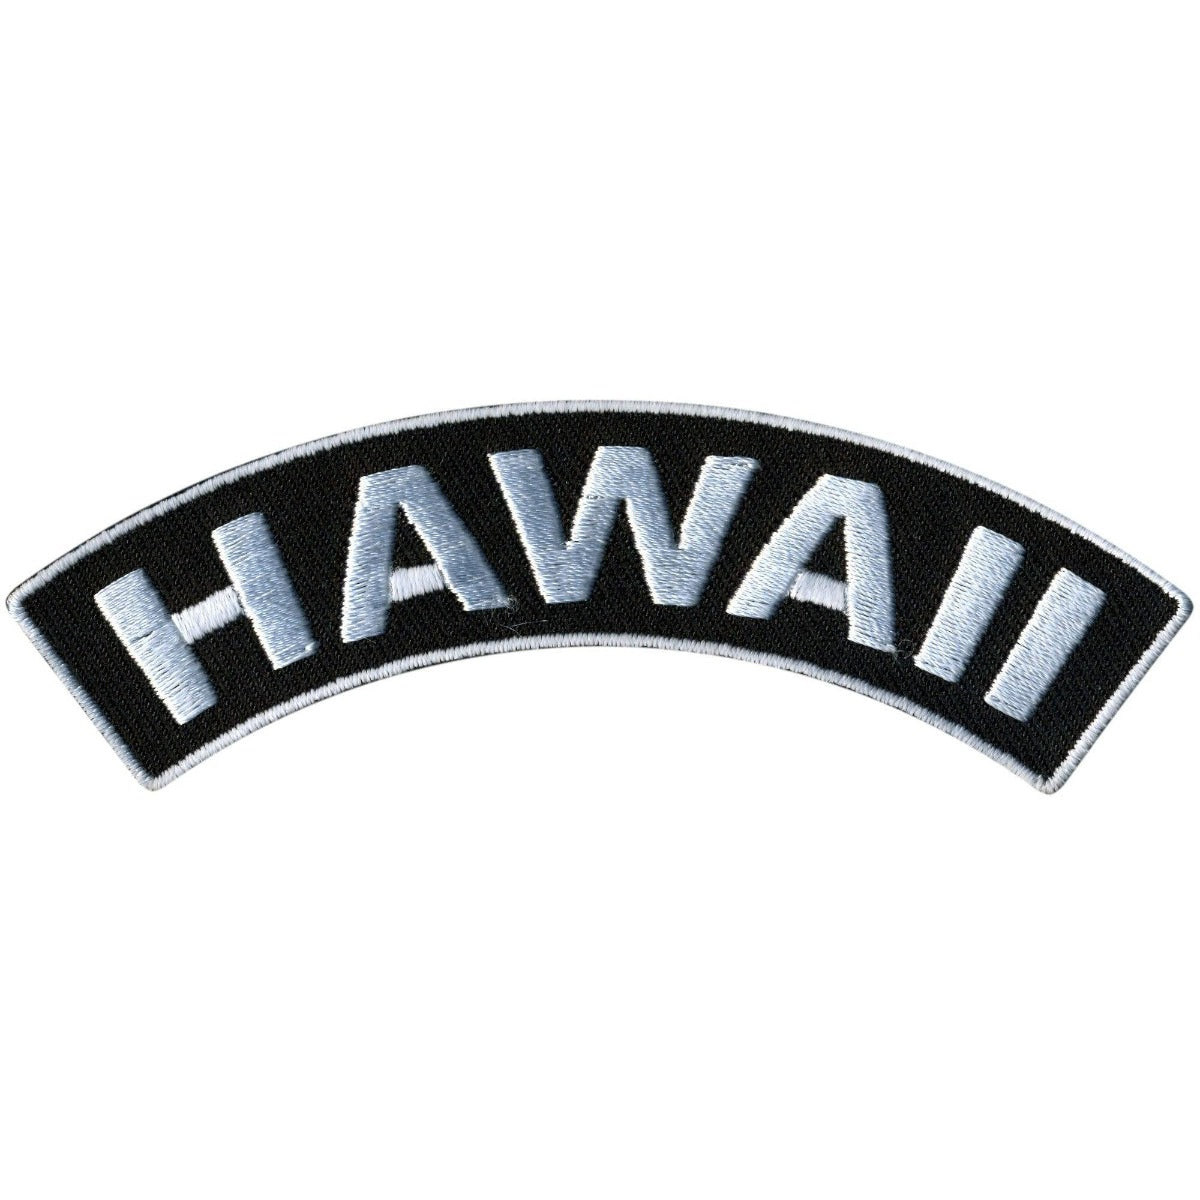 Hot Leathers Hawaii 4” X 1” Top Rocker Patch - American Legend Rider